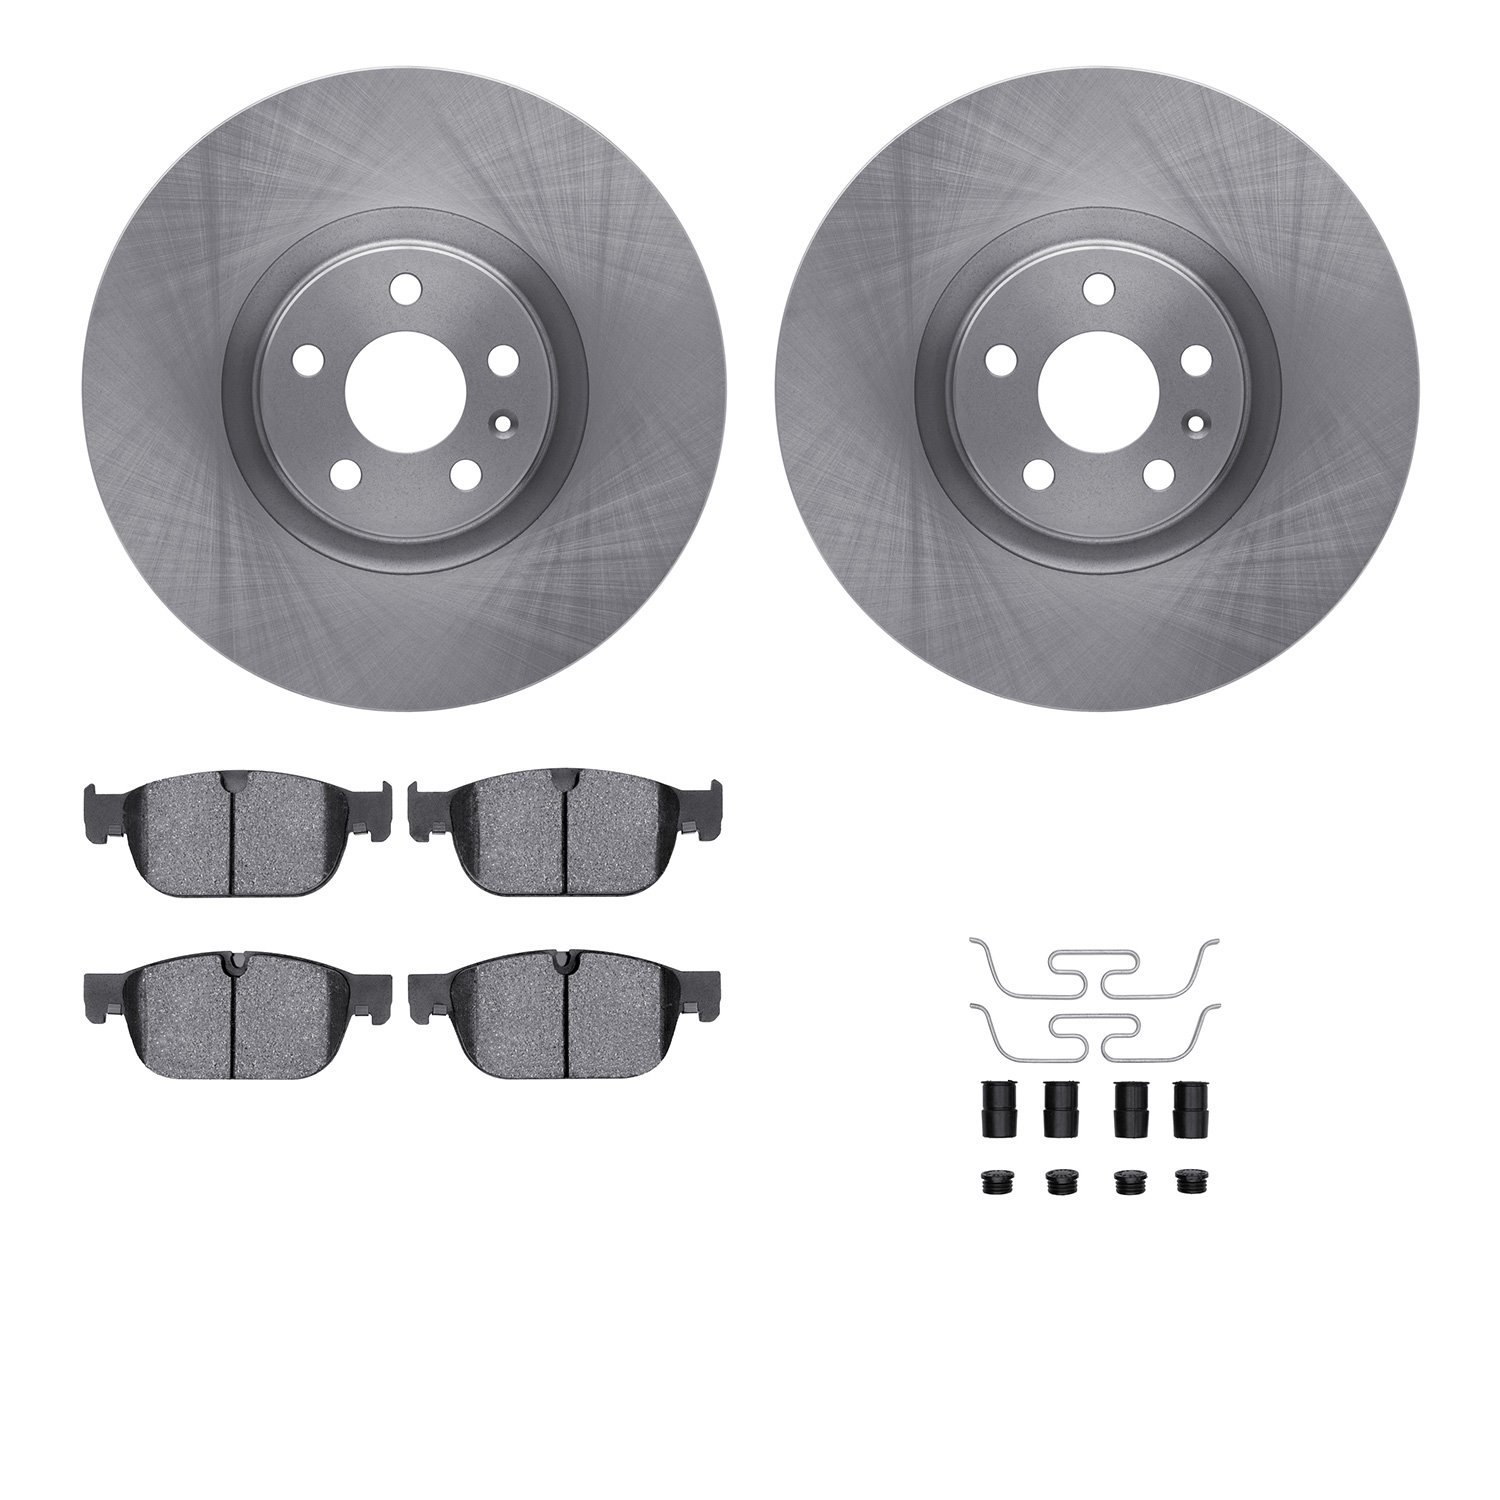 6612-27211 Brake Rotors w/5000 Euro Ceramic Brake Pads Kit with Hardware, Fits Select Multiple Makes/Models, Position: Front